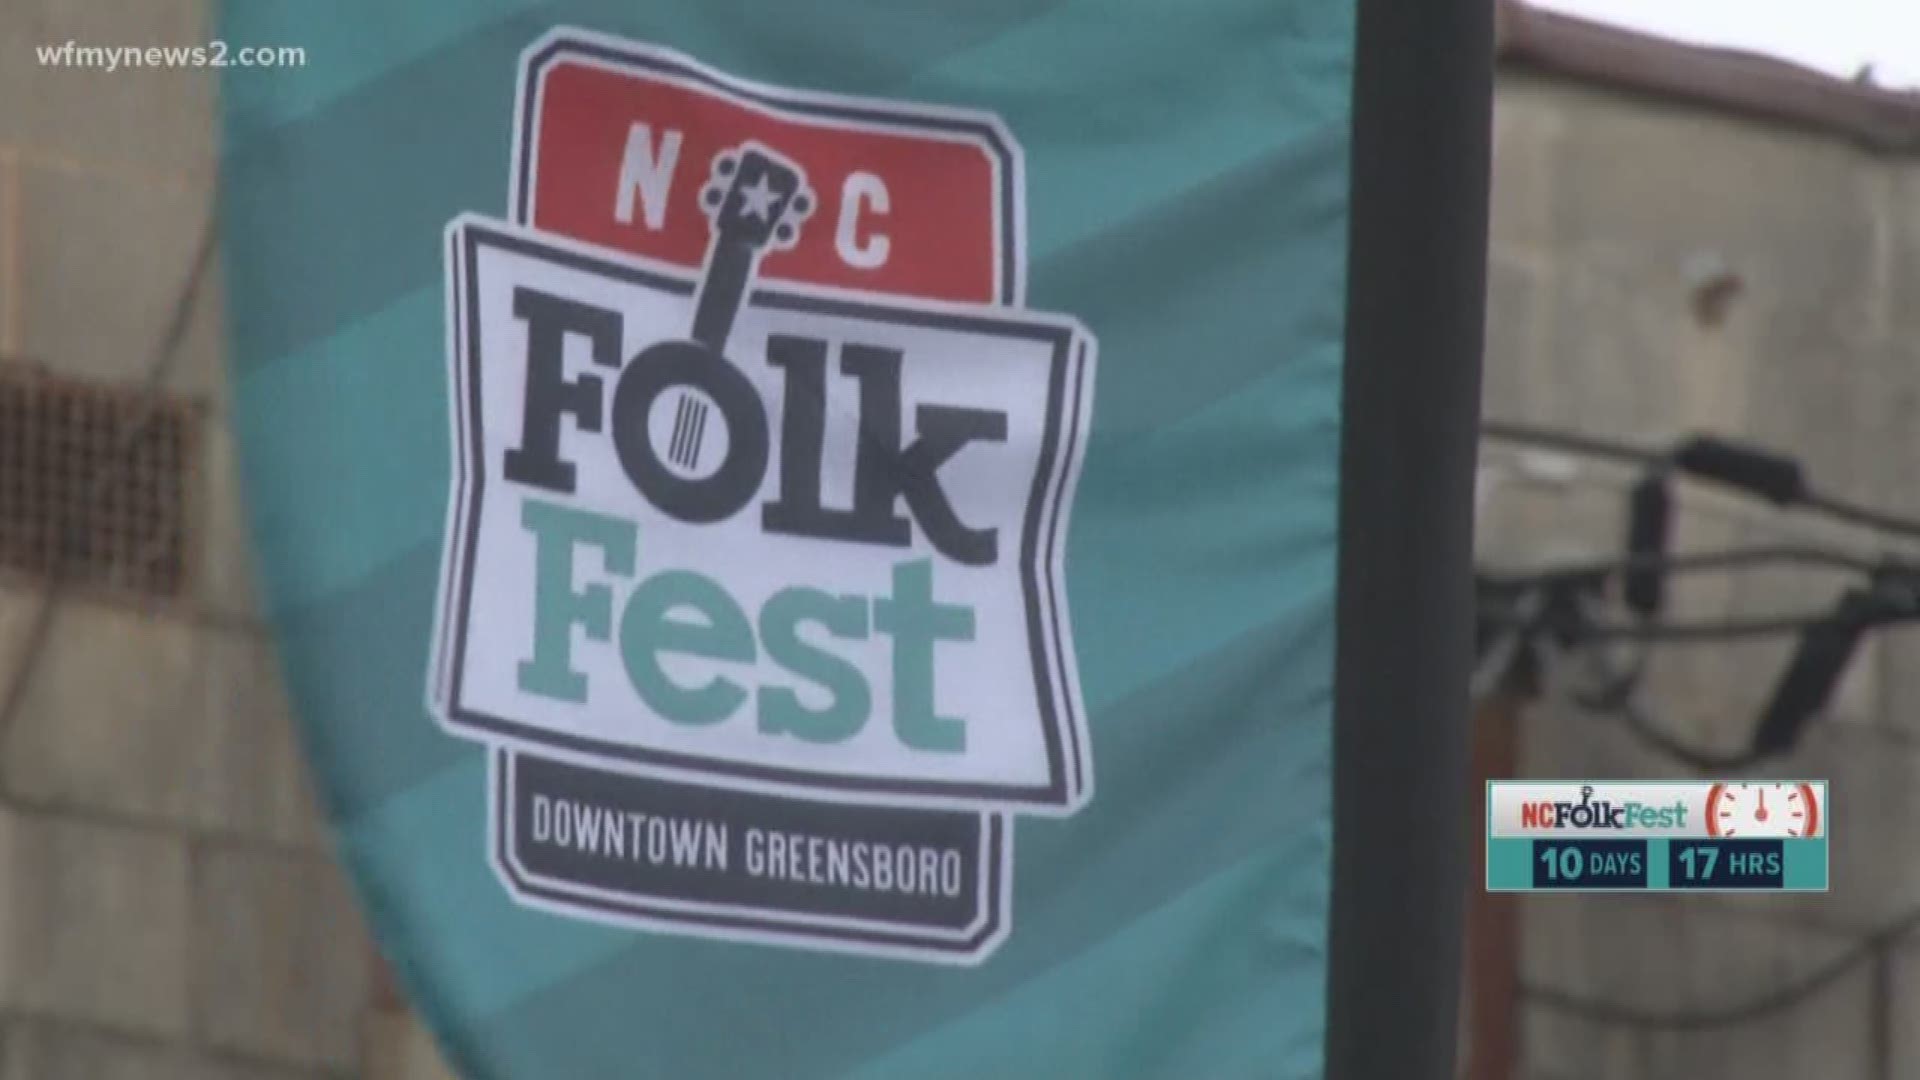 The free festival features music and performers from all over the world.